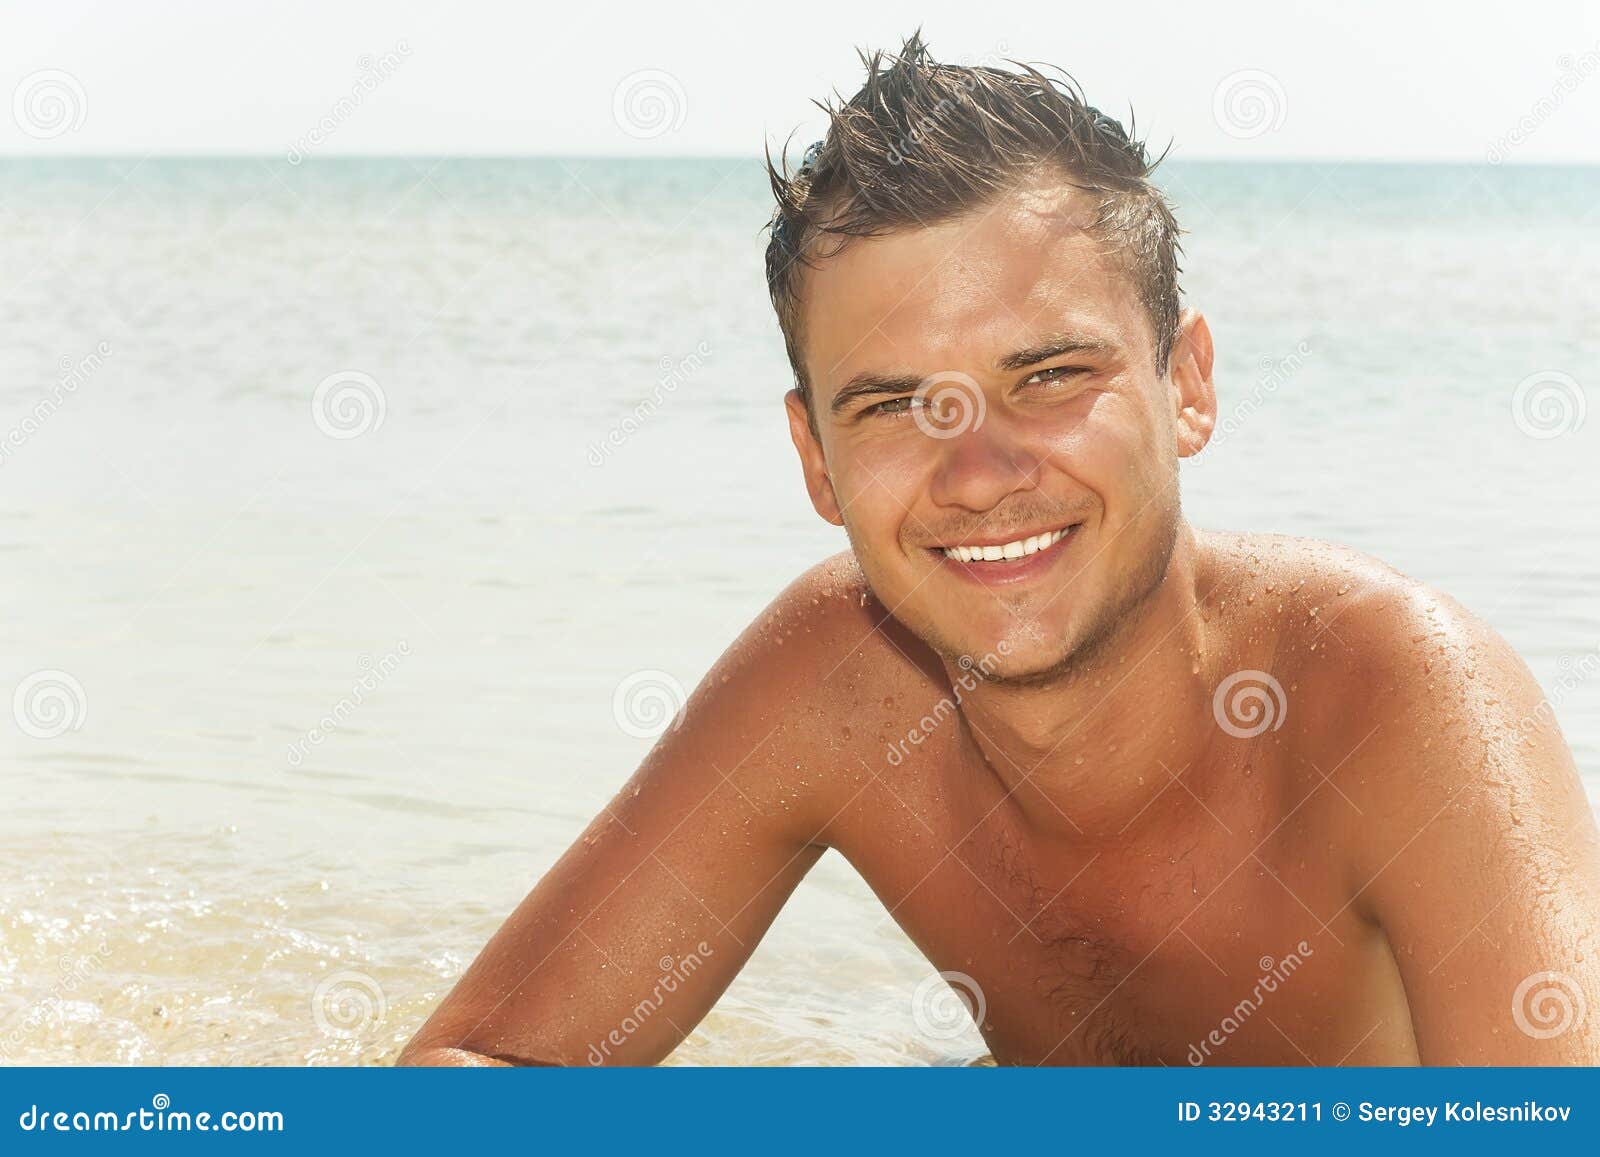 Guy lying in the water stock image. Image of beach, leather - 32943211